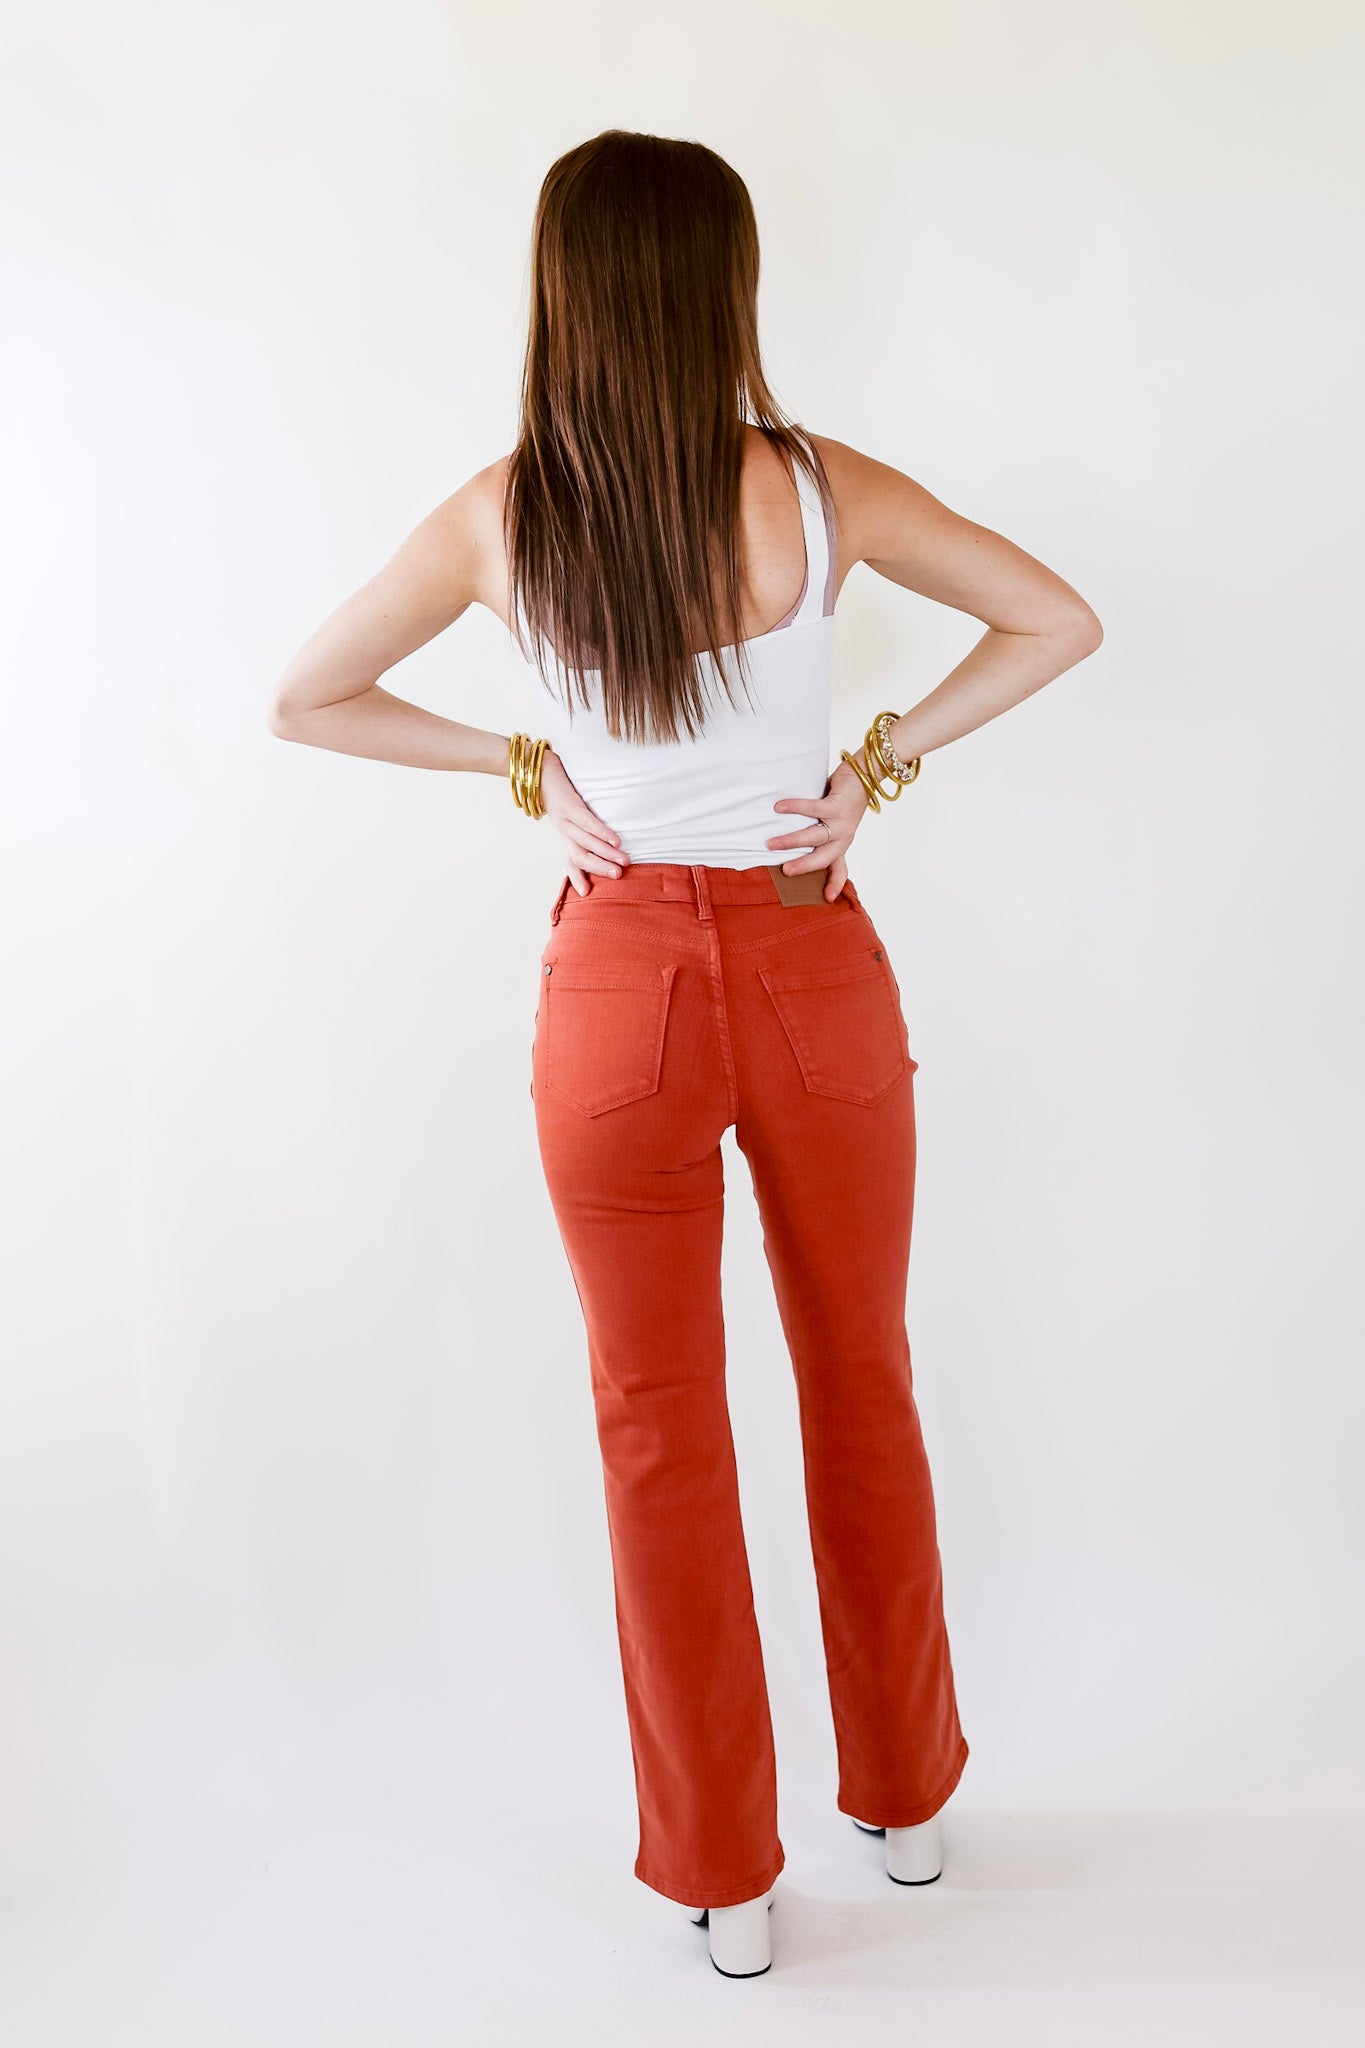 Judy Blue | Fall Crush Slim Boot Cut Jeans in Rust Orange - Giddy Up Glamour Boutique